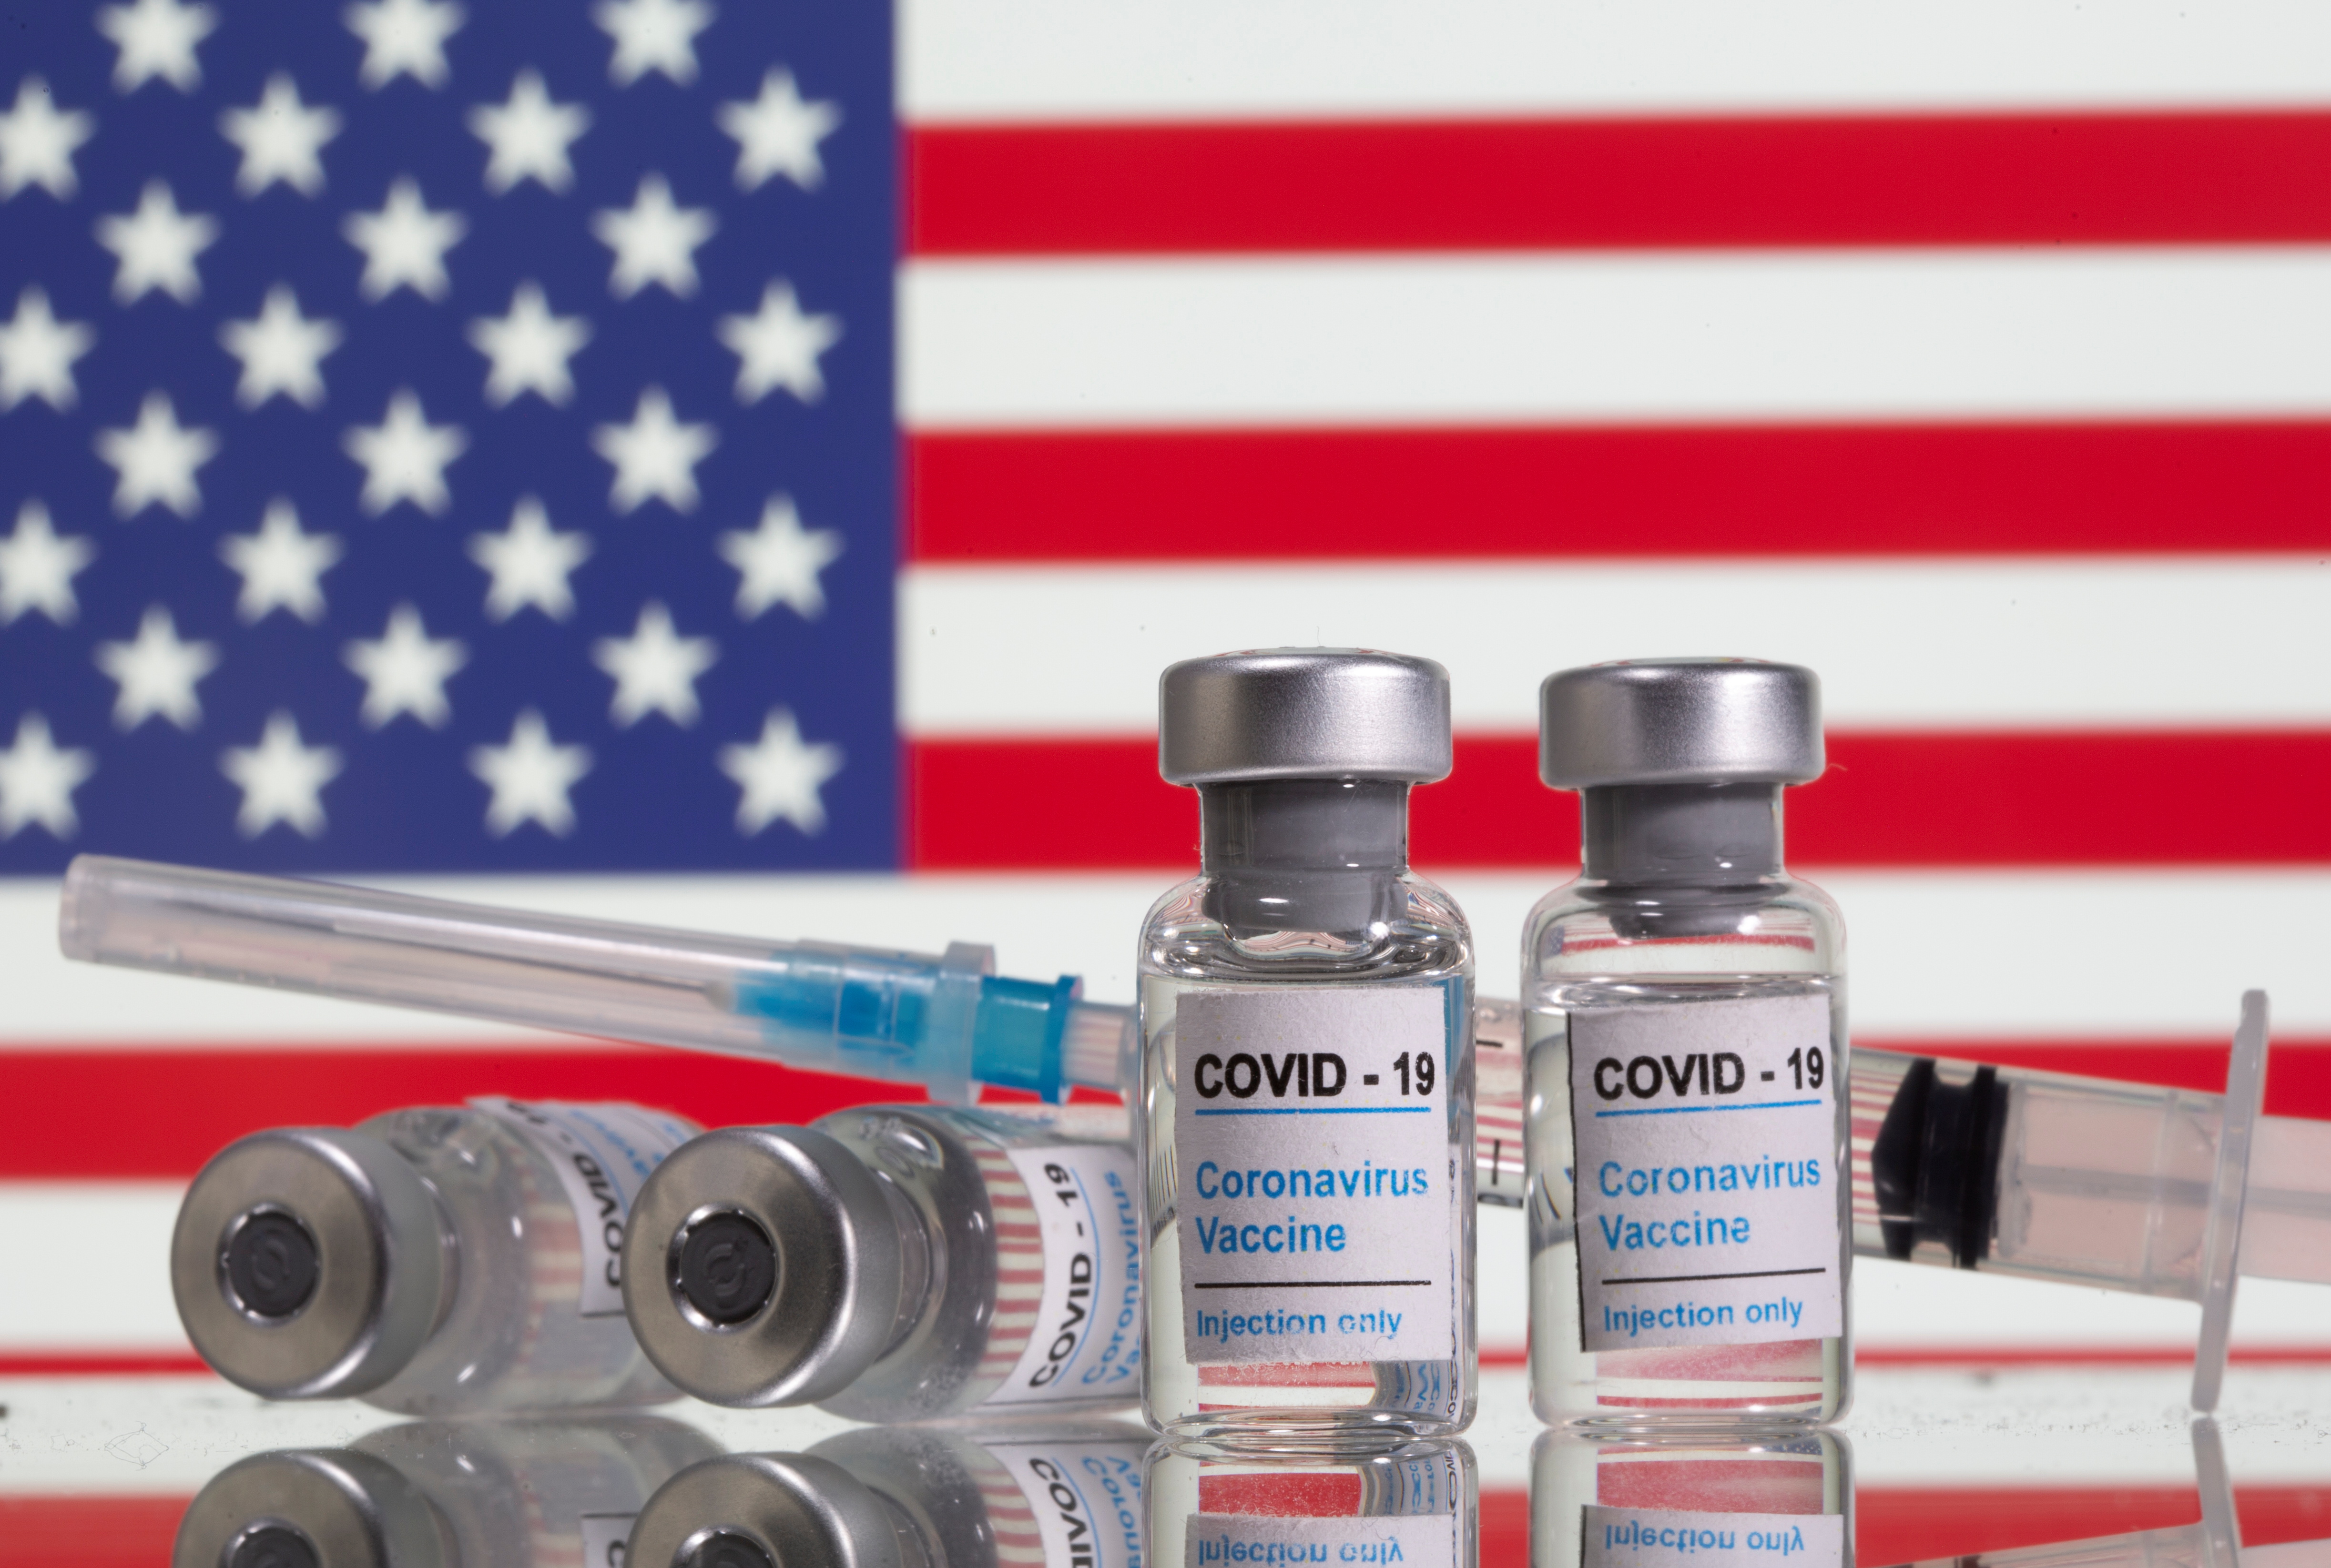 Vials labelled "COVID-19 Coronavirus Vaccine" and sryinge are seen in front of displayed USA  flag in this illustration